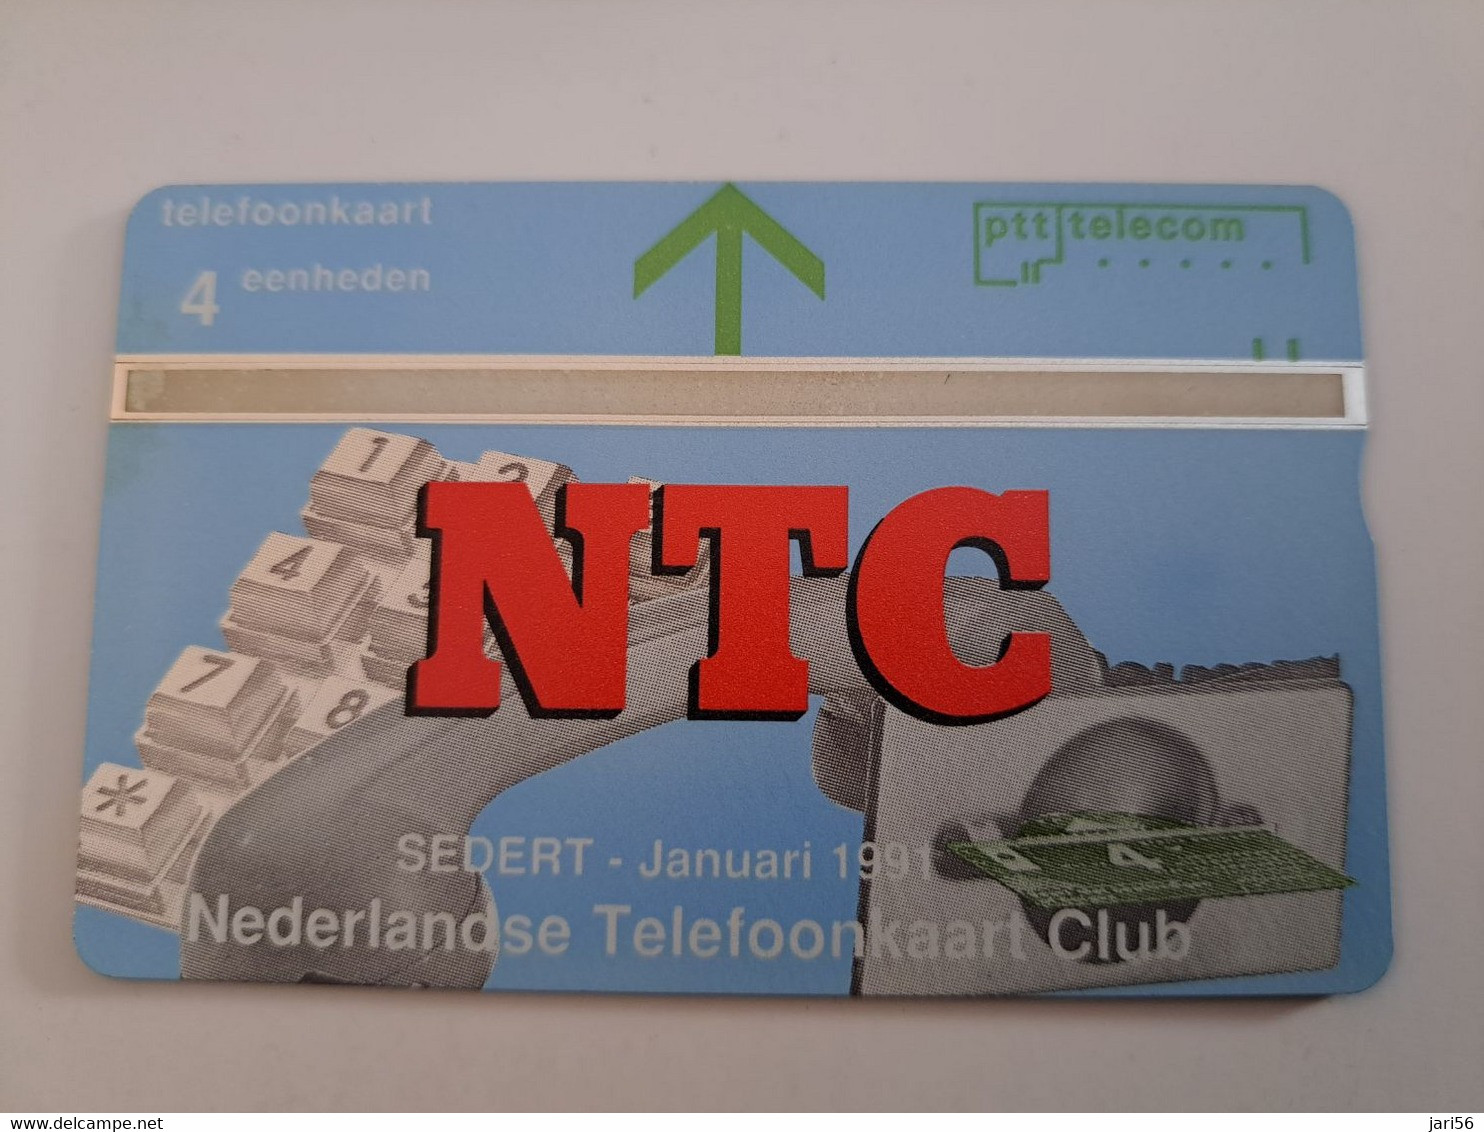 NETHERLANDS  ADVERTISING  4 UNITS/ / NTC CLUBCARD    / NO; R 006  LANDYS & GYR   Mint  ** 11796** - Private